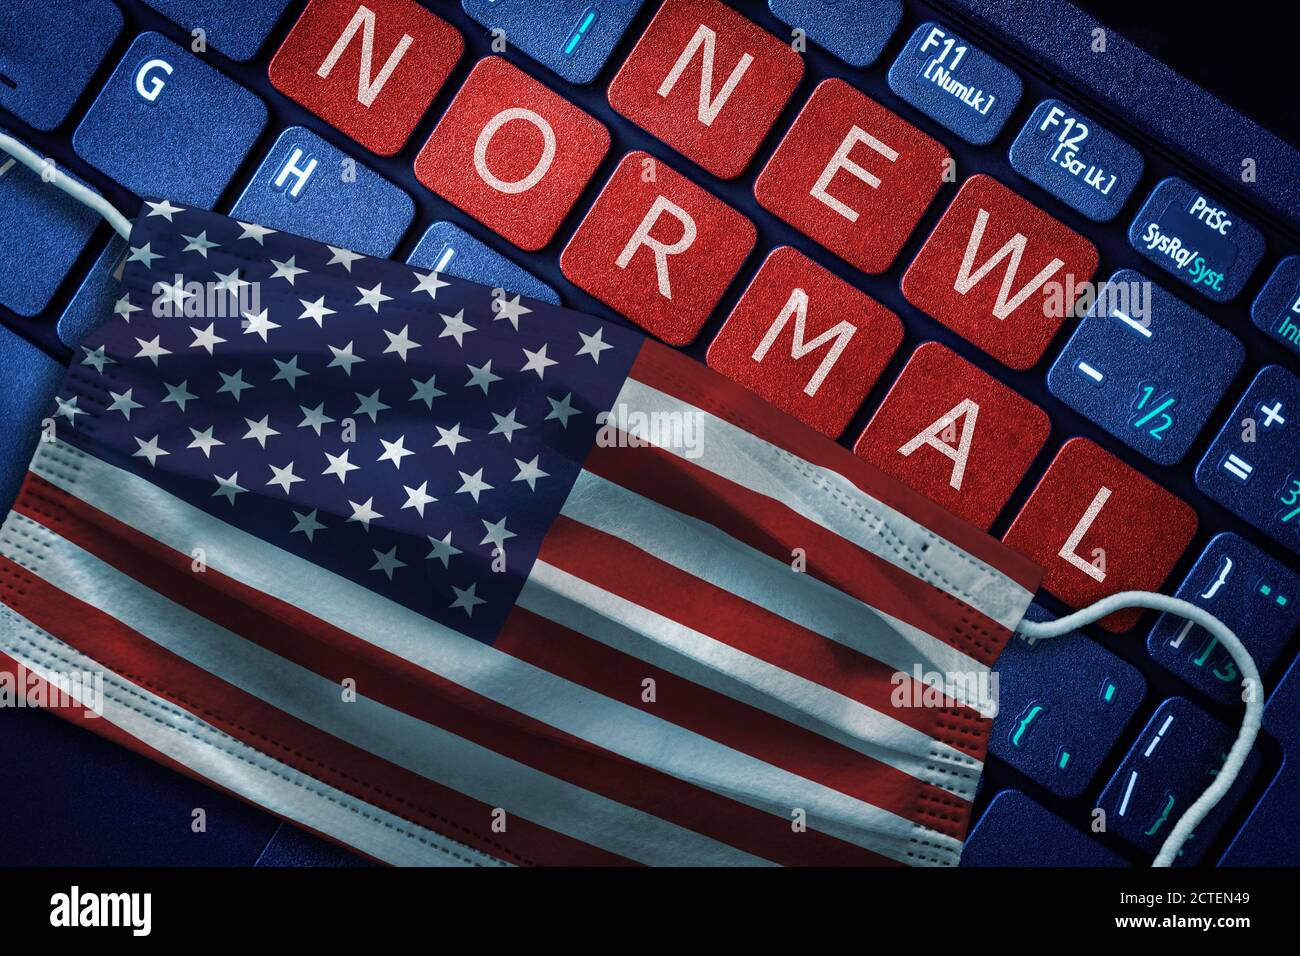 COVID-19 coronavirus new normal concept in United States as shown by US flag on face mask with New Normal on laptop red alert keyboard buttons. Stock Photo